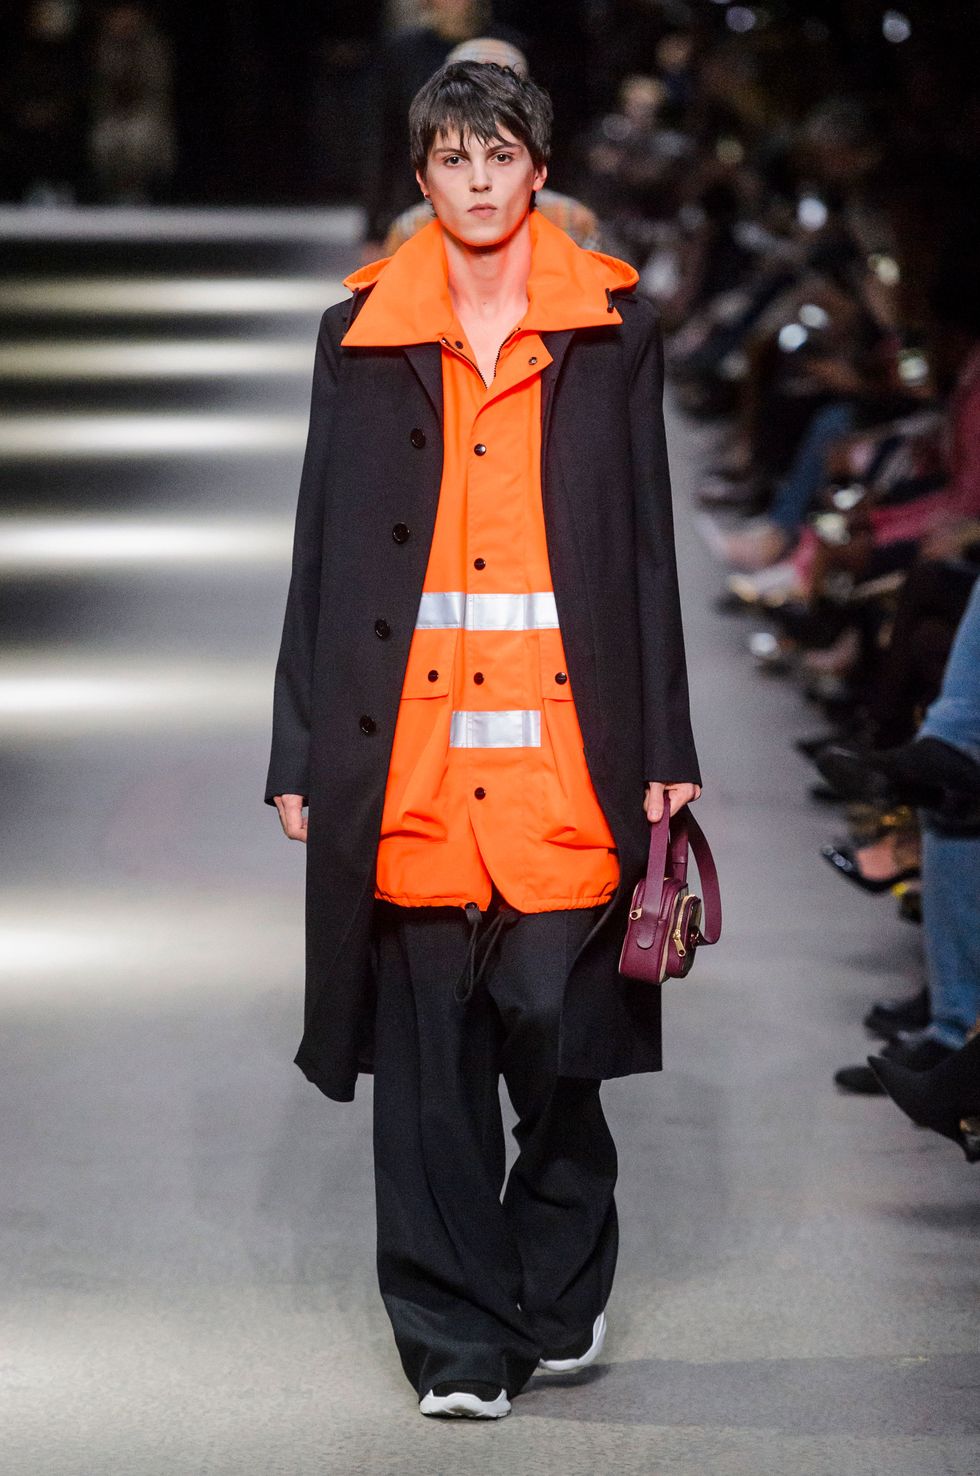 84 Looks From Burberry Fall 2018 LFW Show – Burberry Runway at